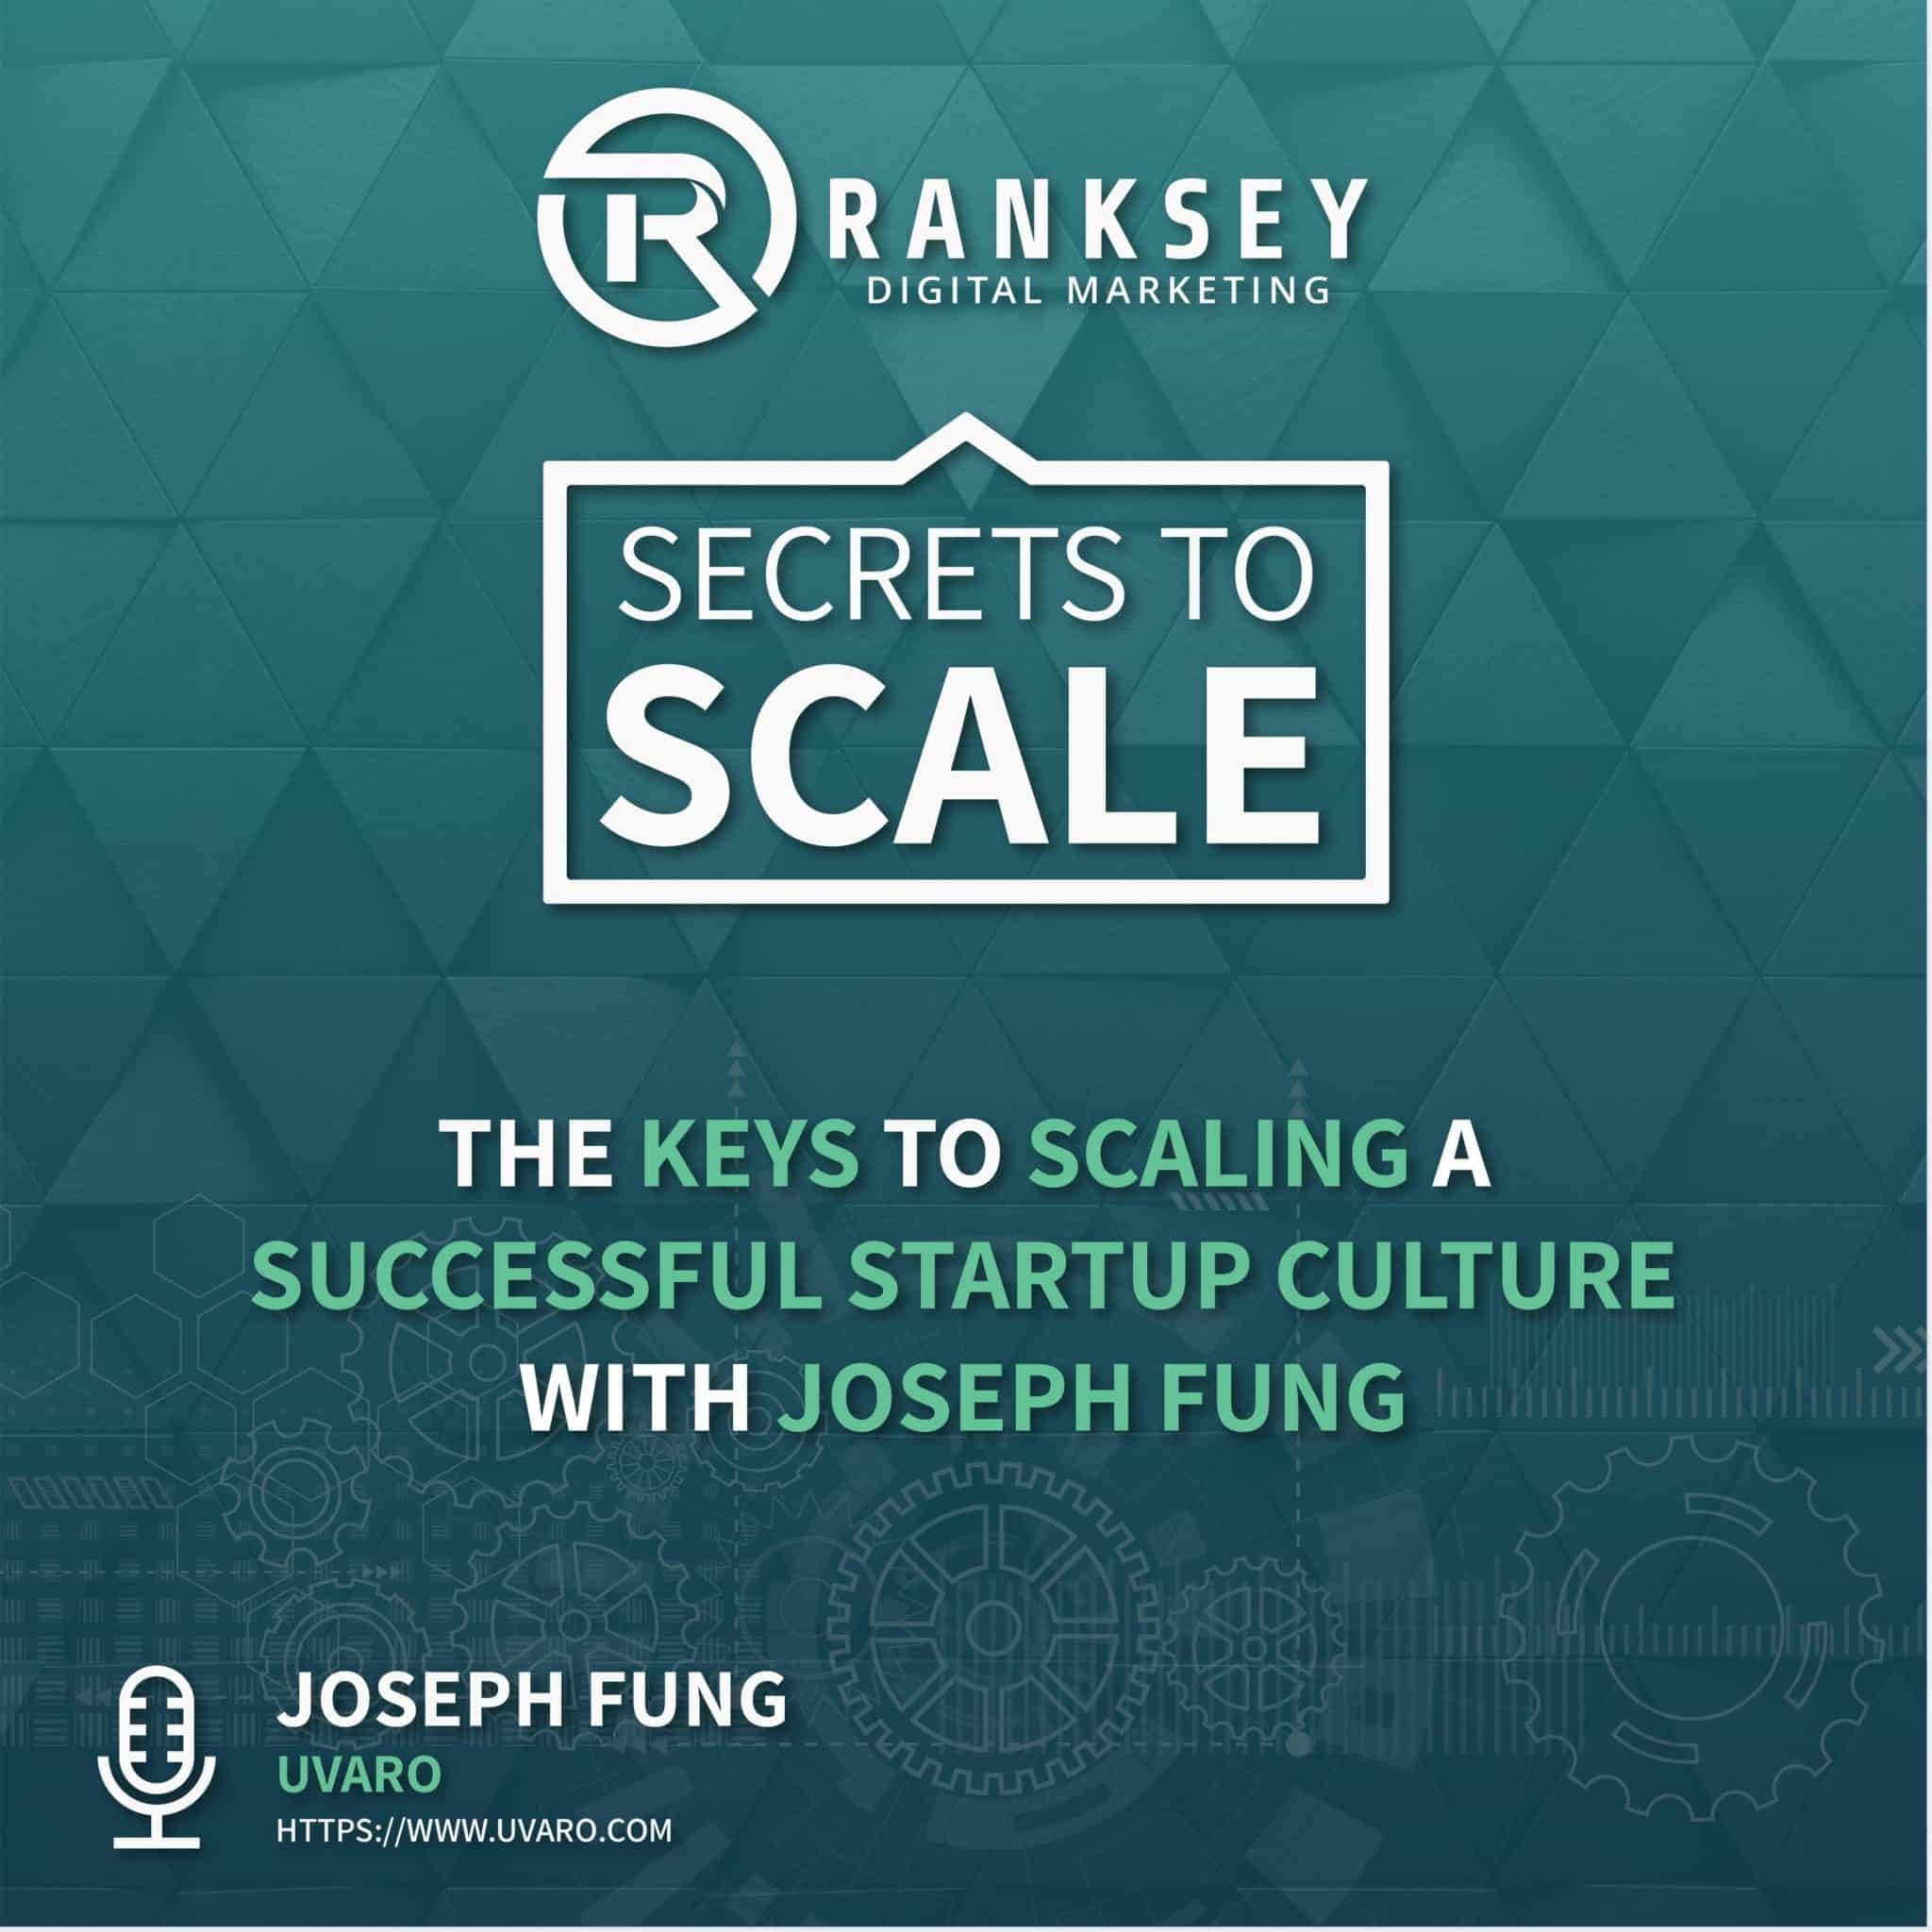 057 - The Keys to Defining and Scaling a Successful Startup Culture with Joseph Fung